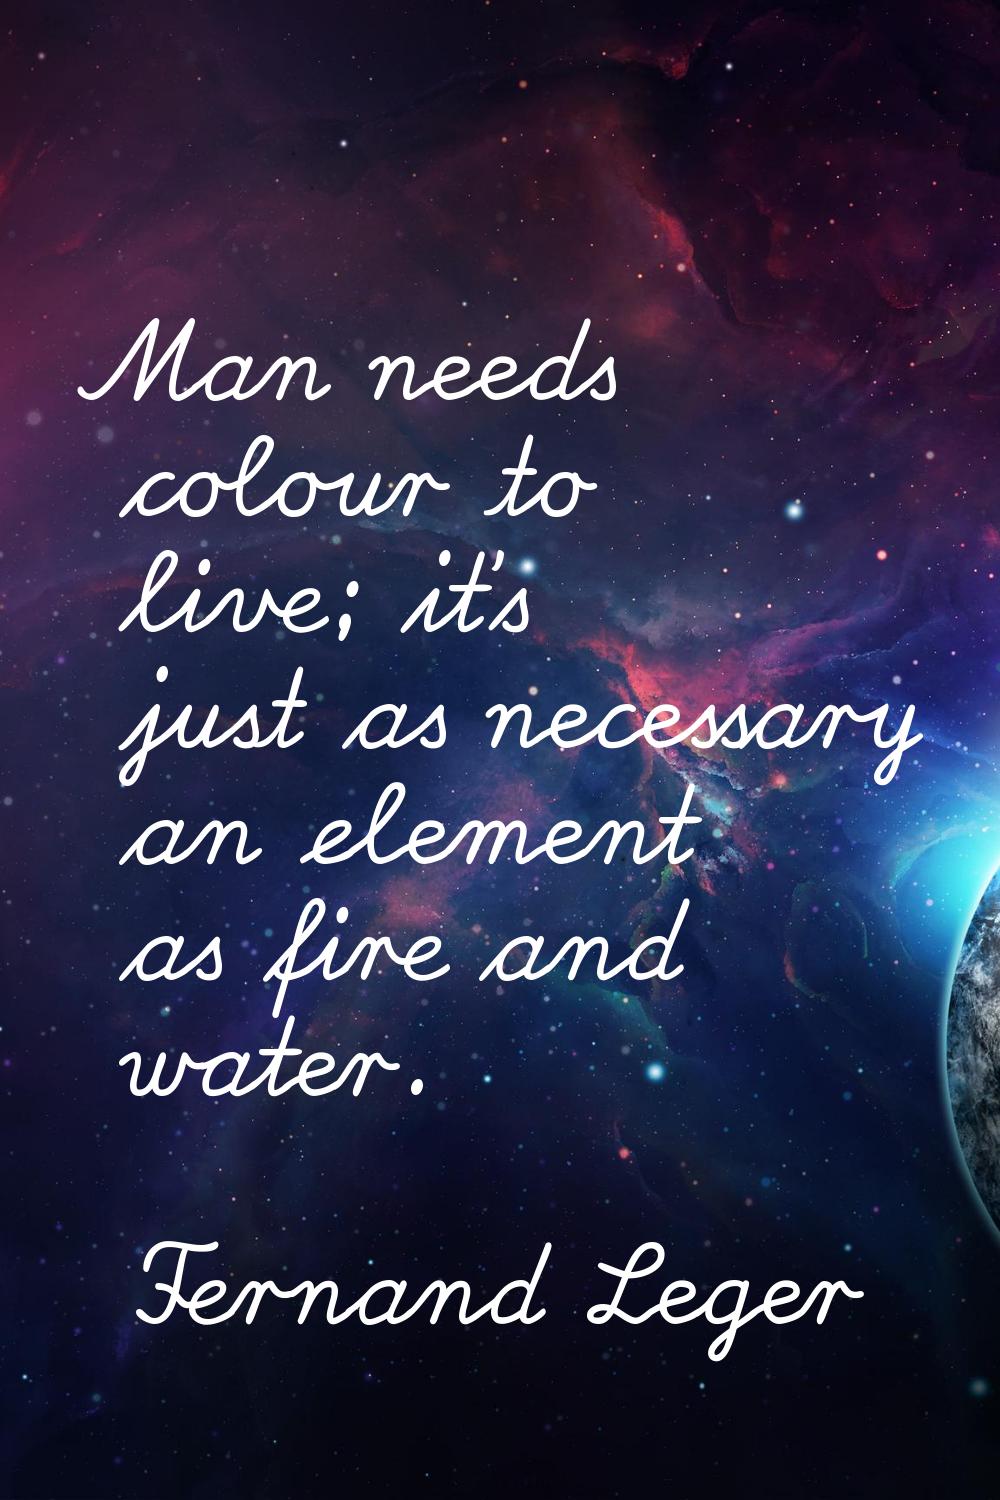 Man needs colour to live; it's just as necessary an element as fire and water.